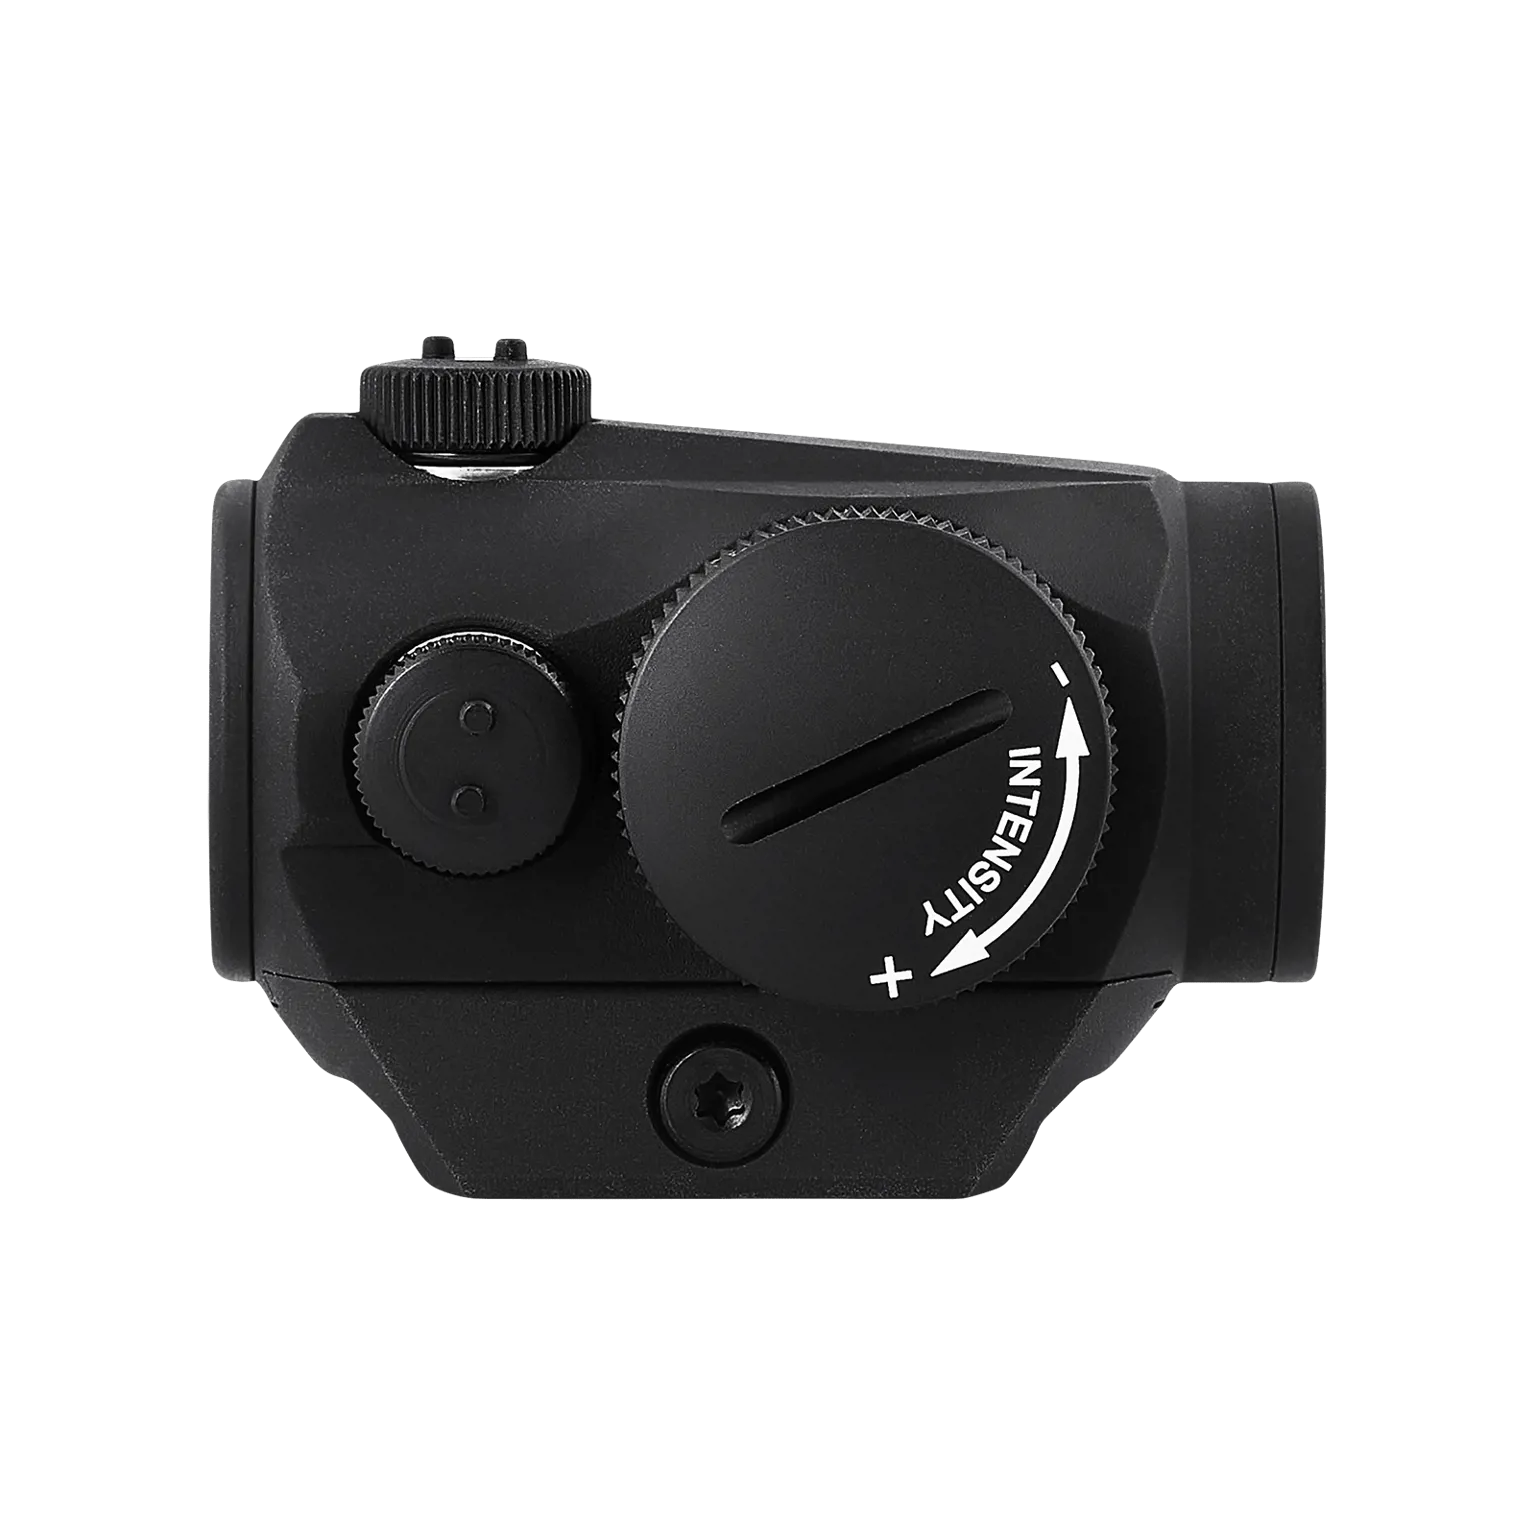 Micro H-1™ 2 MOA - Red dot reflex sight with standard mount for Weaver/Picatinny - 5